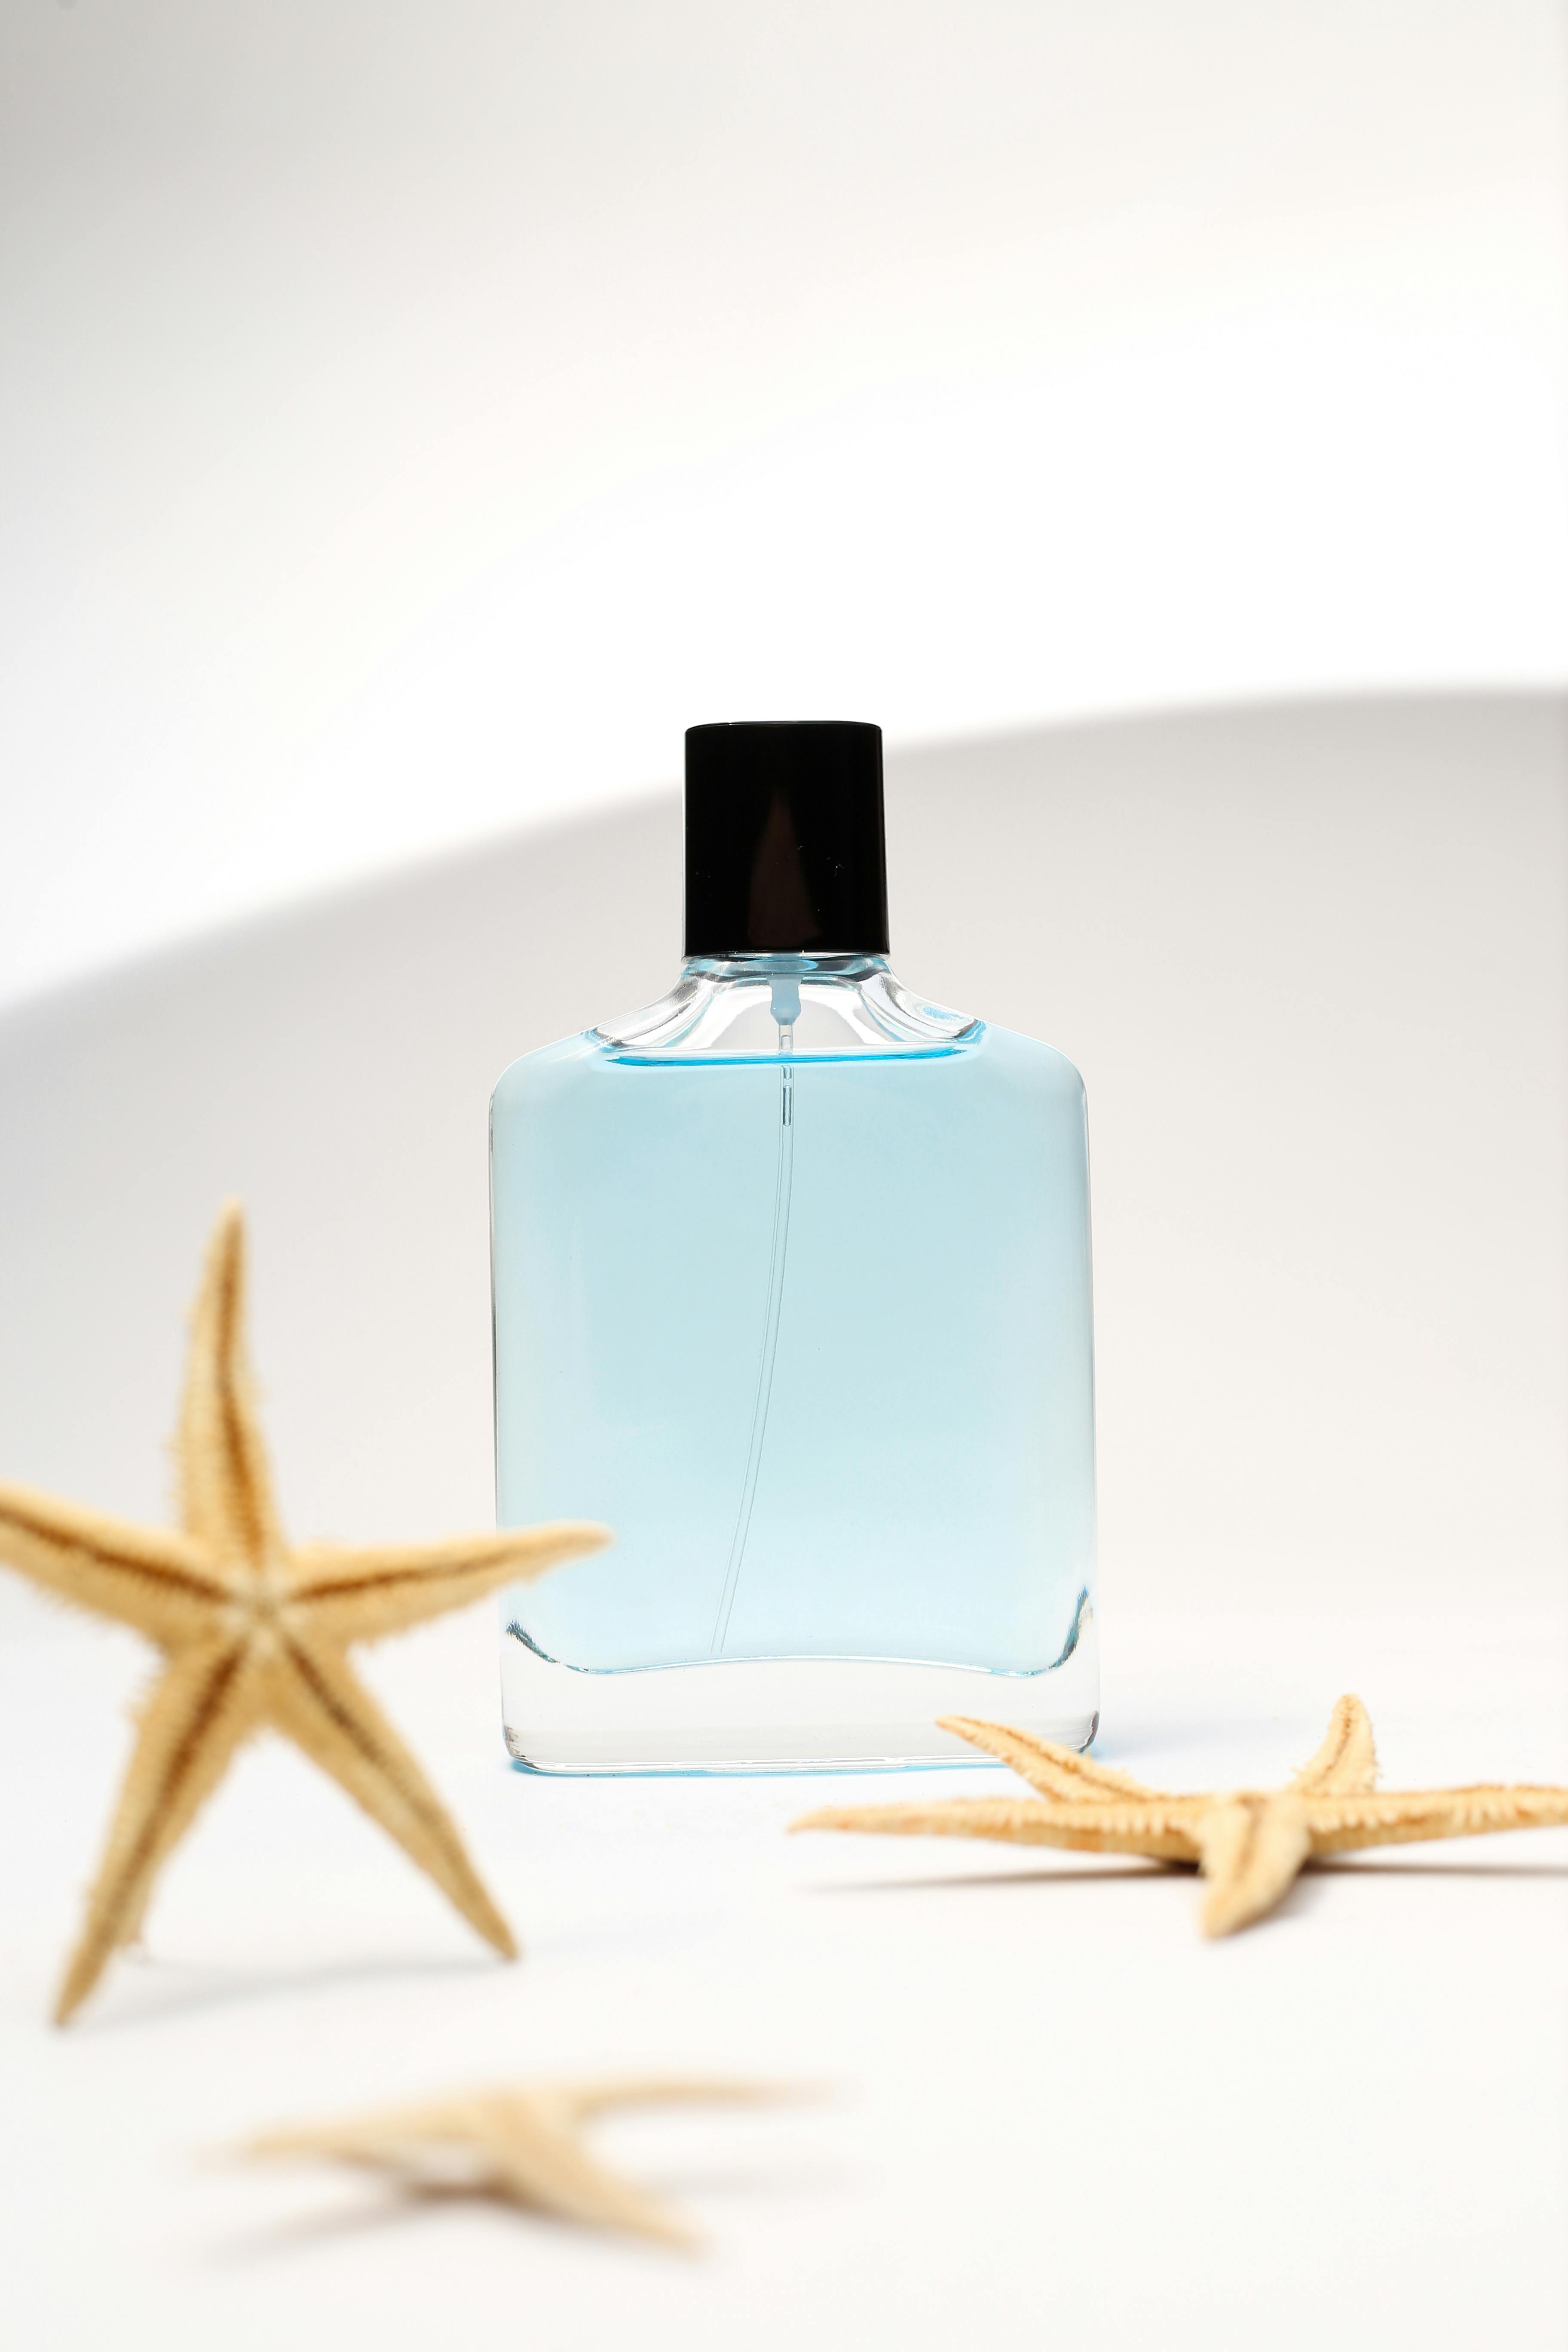 Perfume Bottle Photos, Download The BEST Free Perfume Bottle Stock